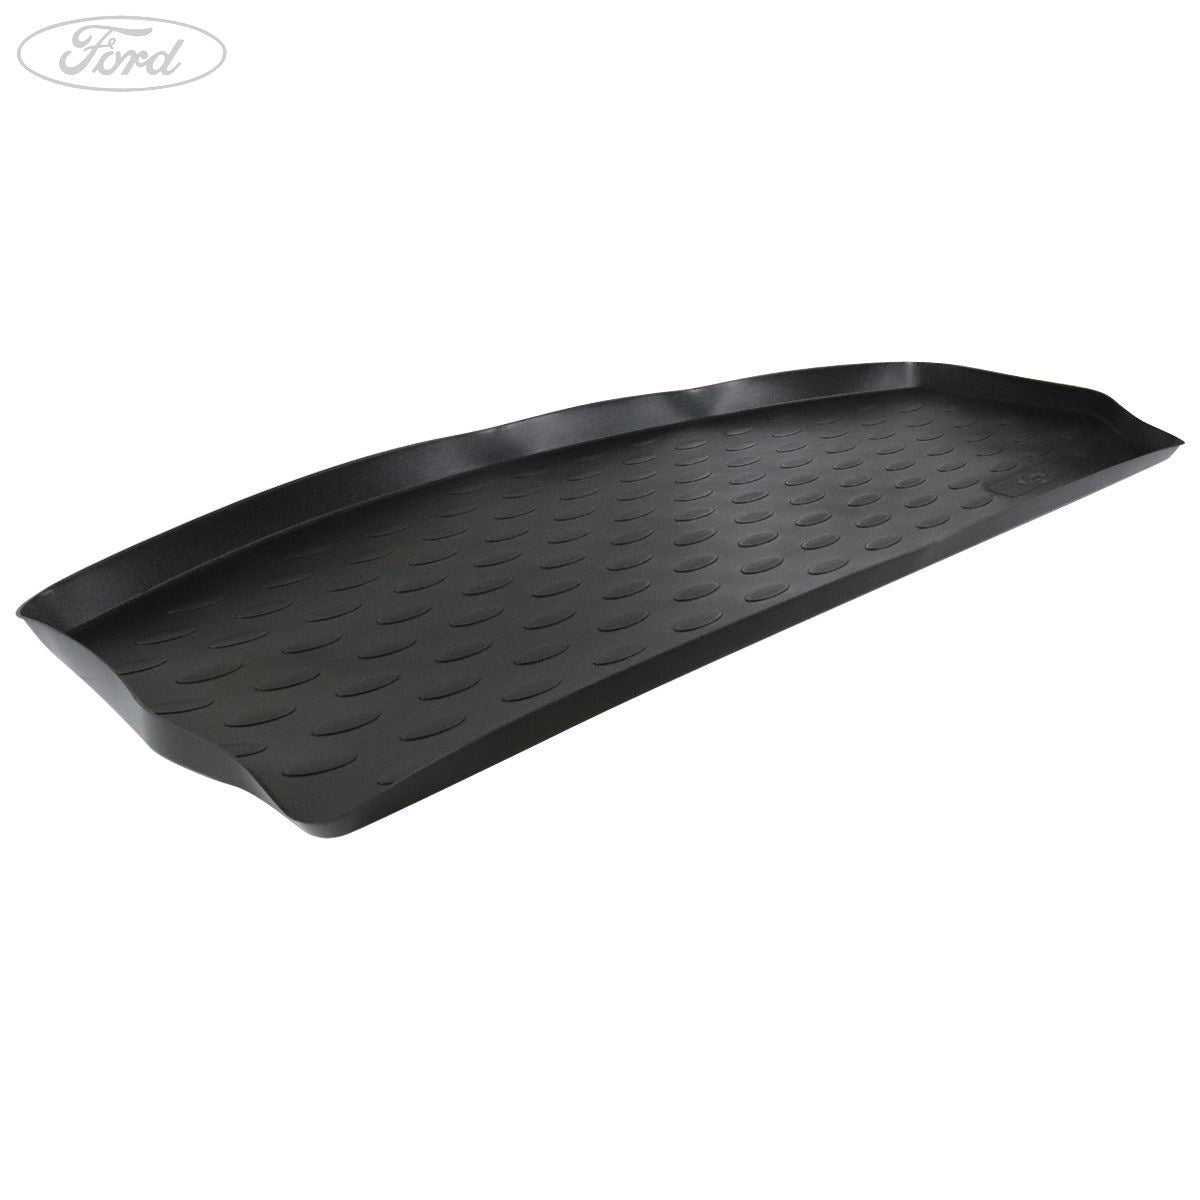 Ford, TRANSIT RUBBER OVERHEAD LOADING COMPARTMENT MAT